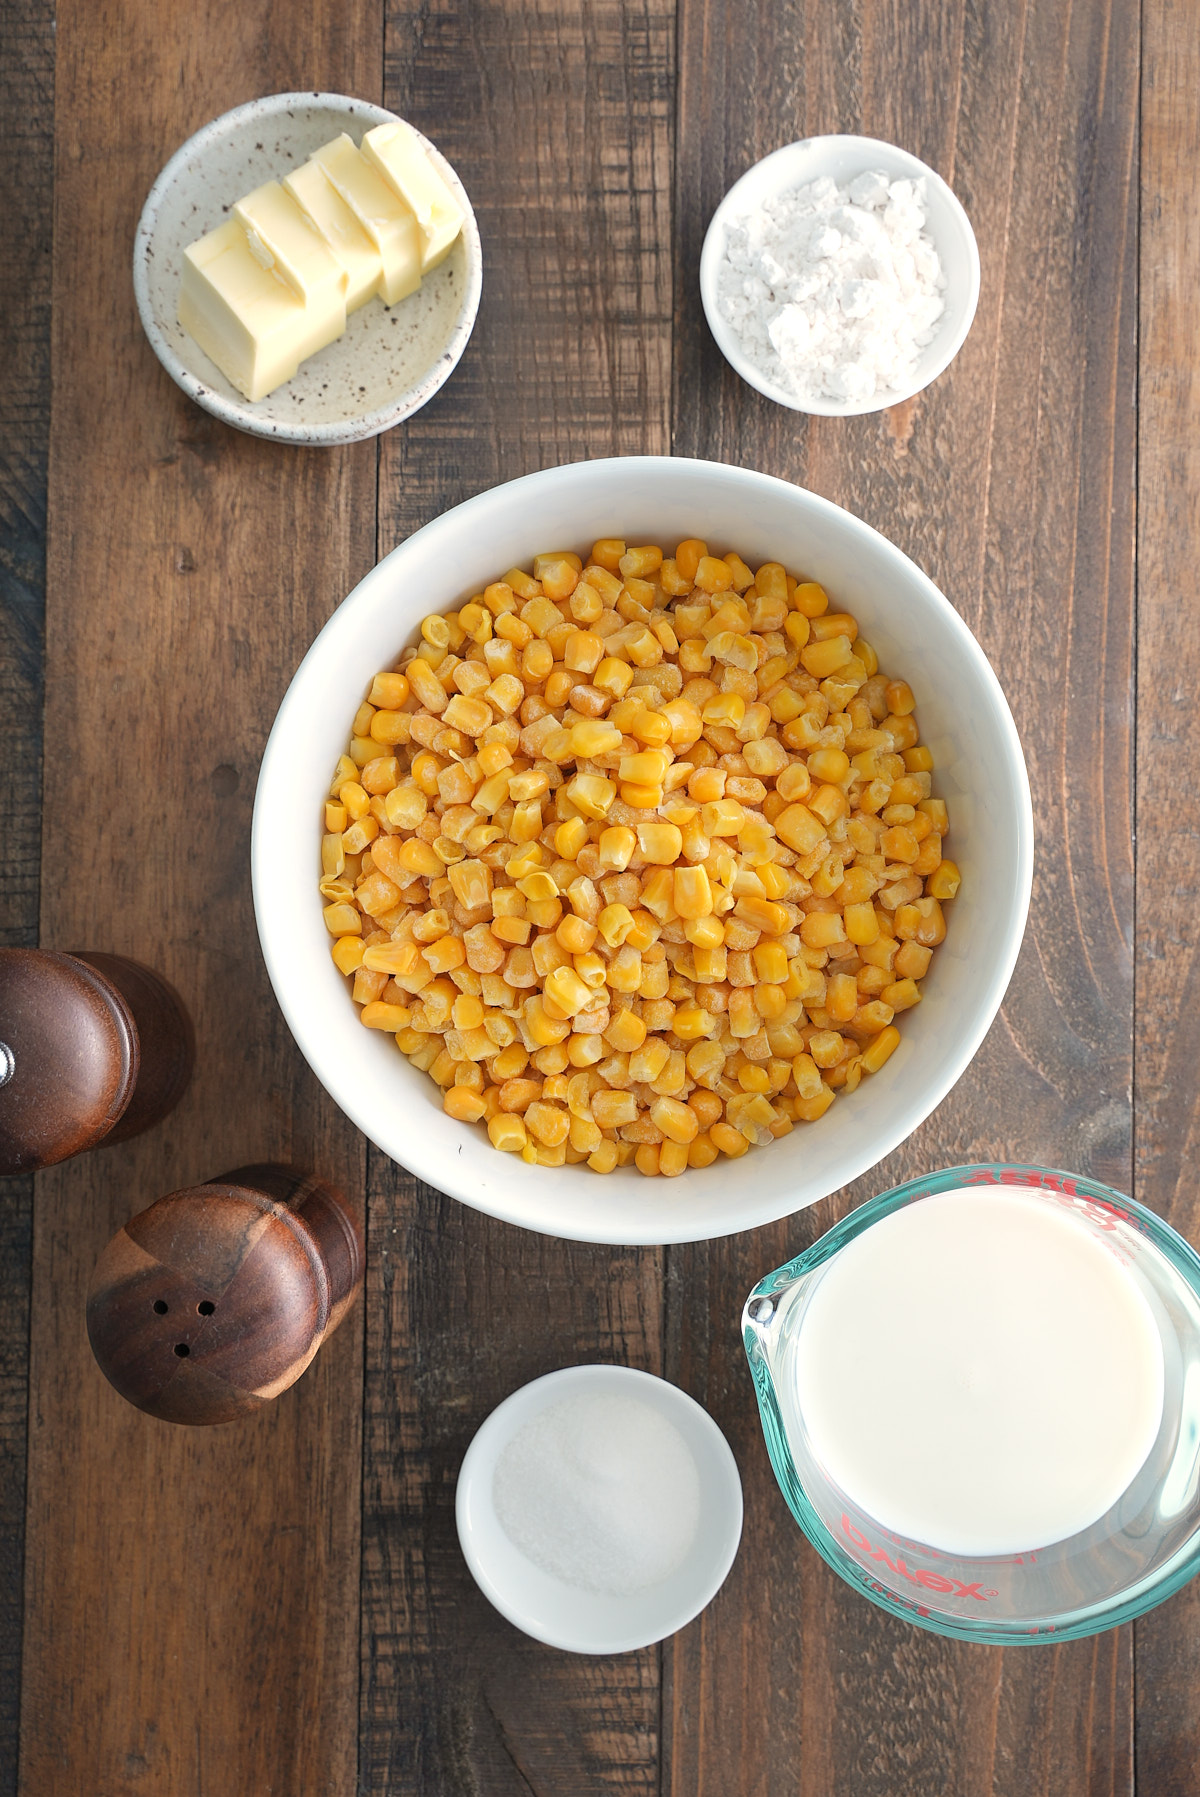 ingredients for creamed corn on wooden table